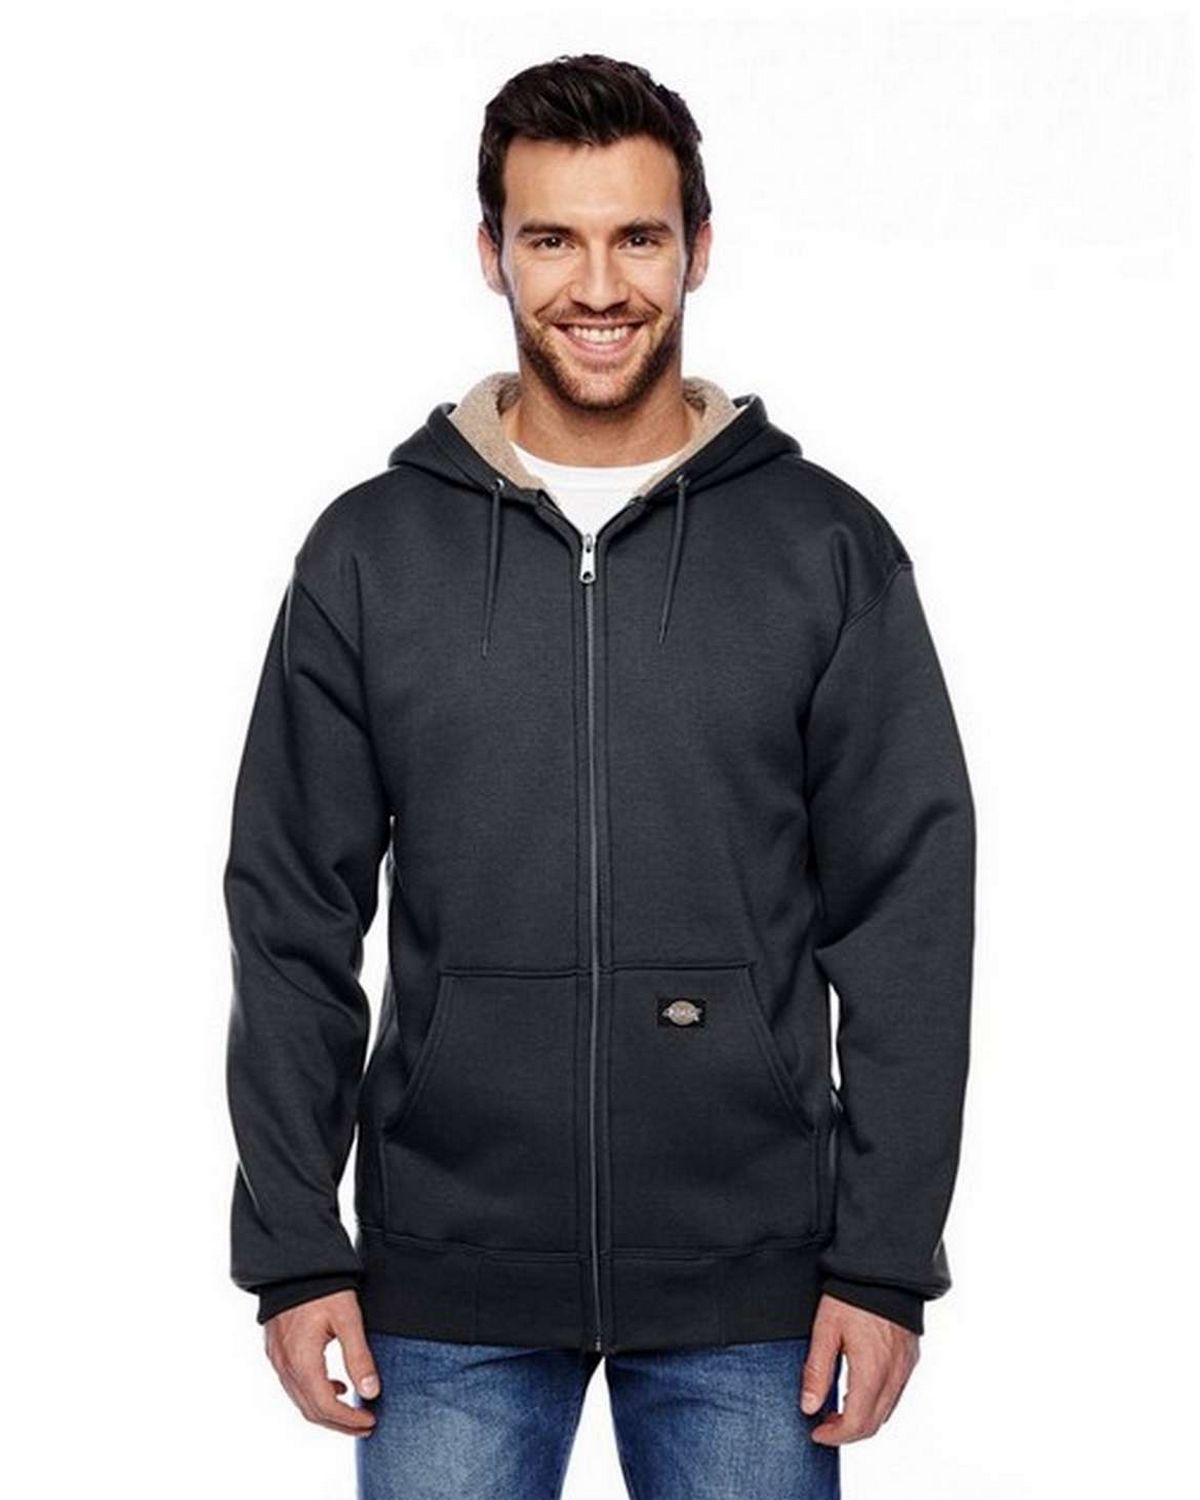 Dickies TW357 Sherpa Lined Fleece - Shop at ApparelnBags.com